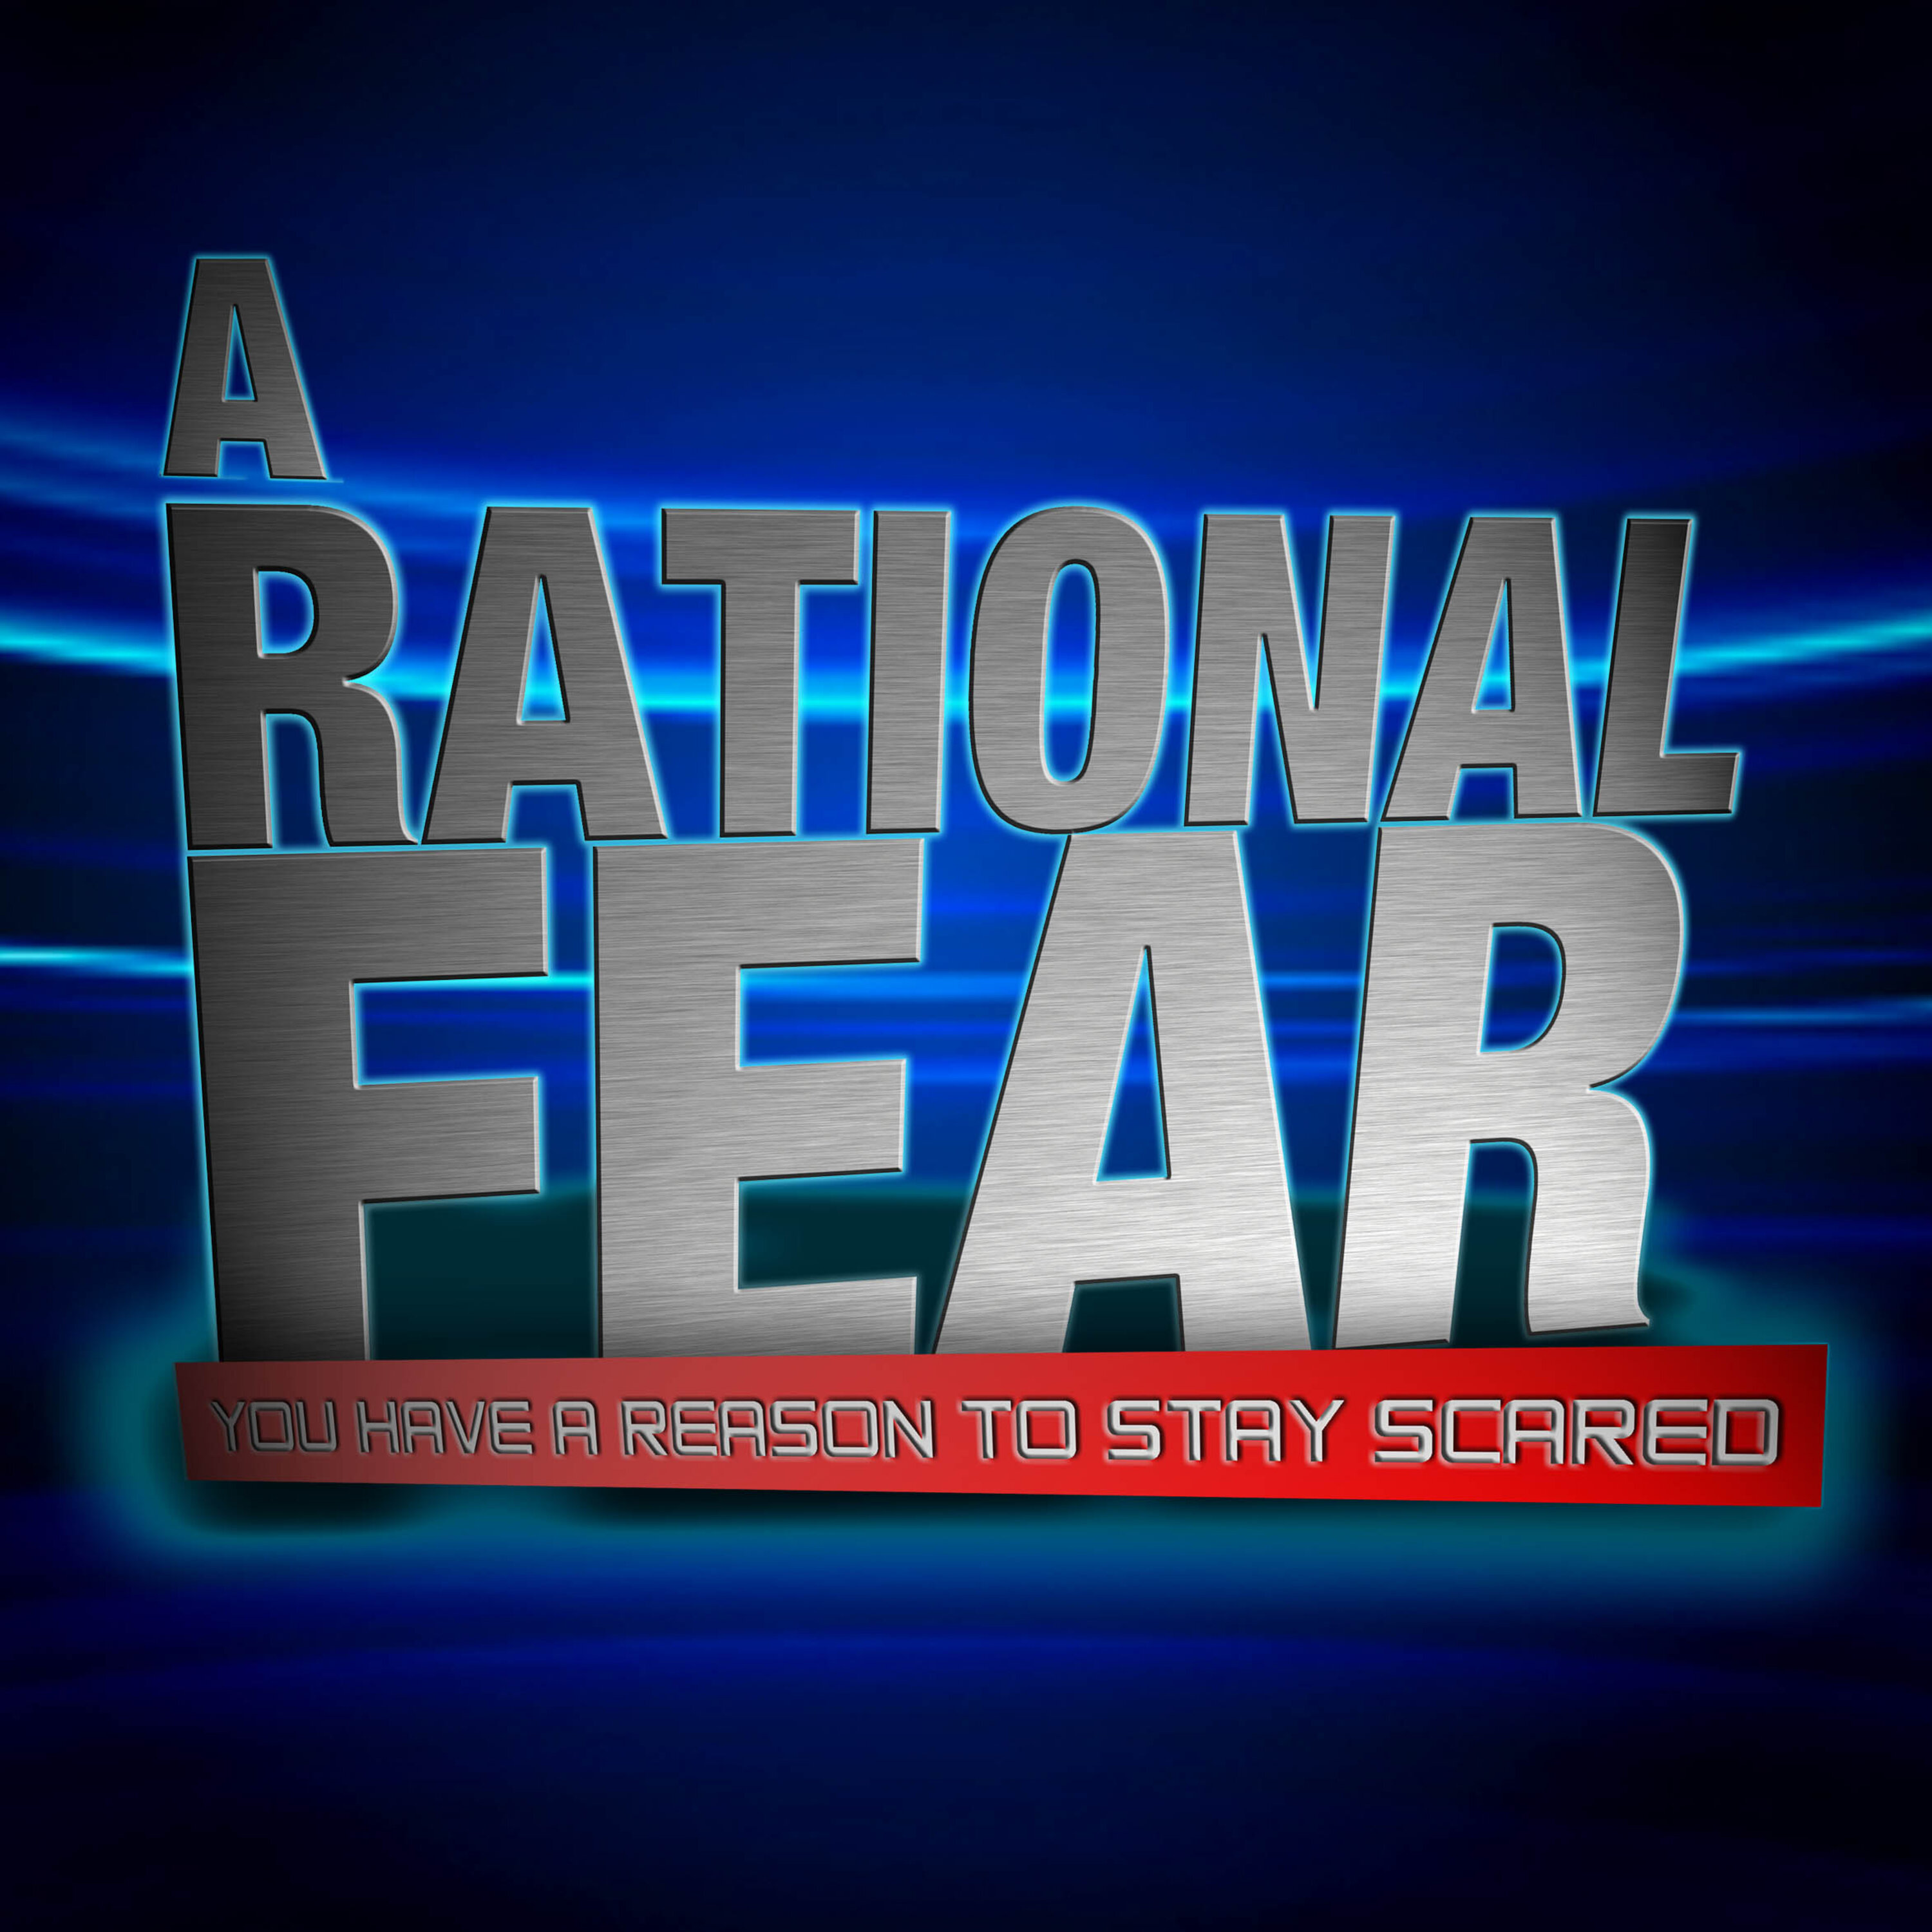 Ira Glass - Retracts The Retraction Of The Retraction - A Rational Fear